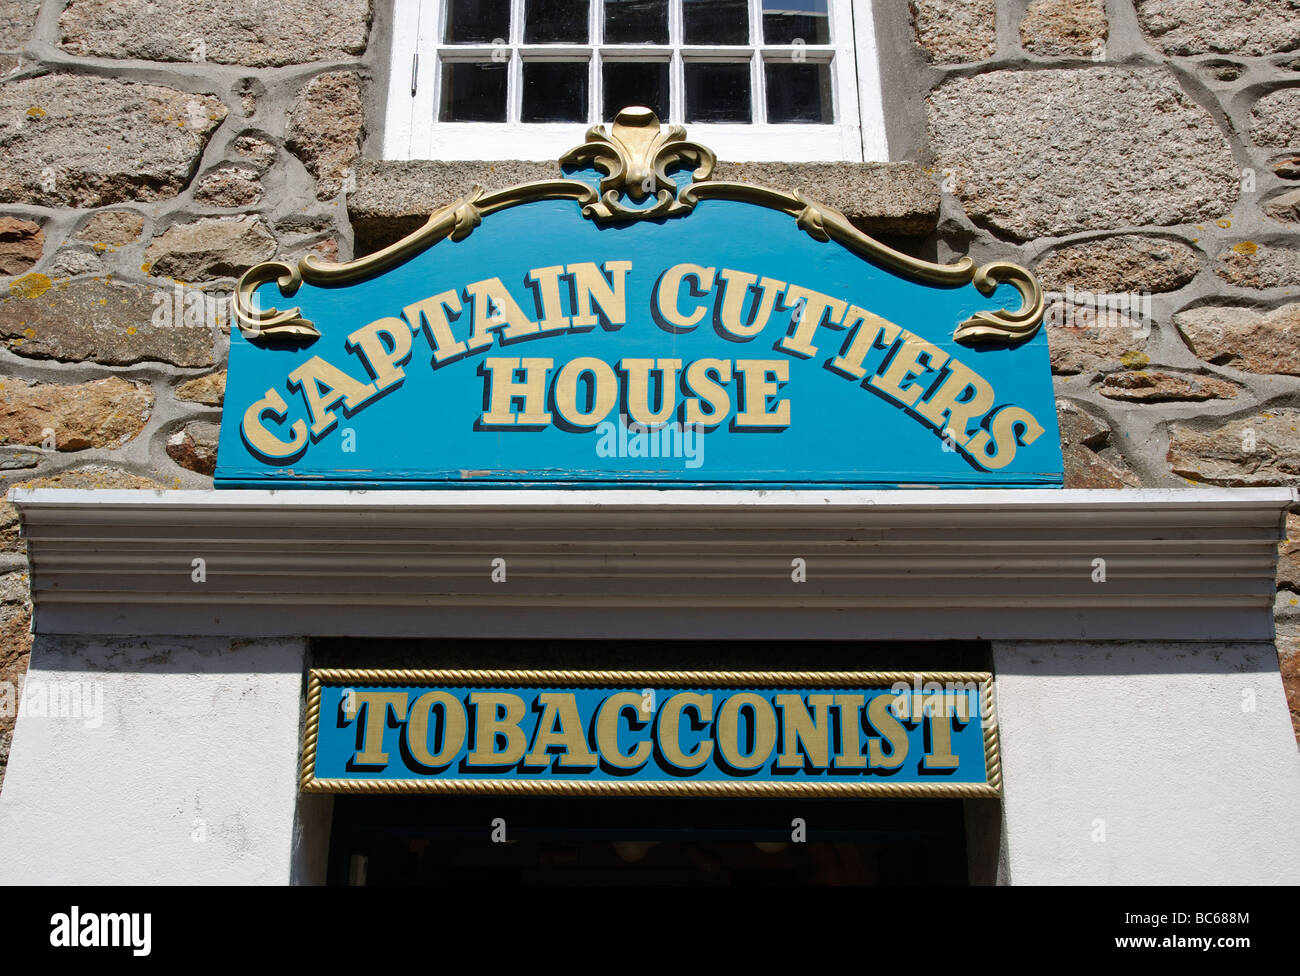 Captain Cutters tobacconist shop in Penzance, Cornwall, UK Stock Photo